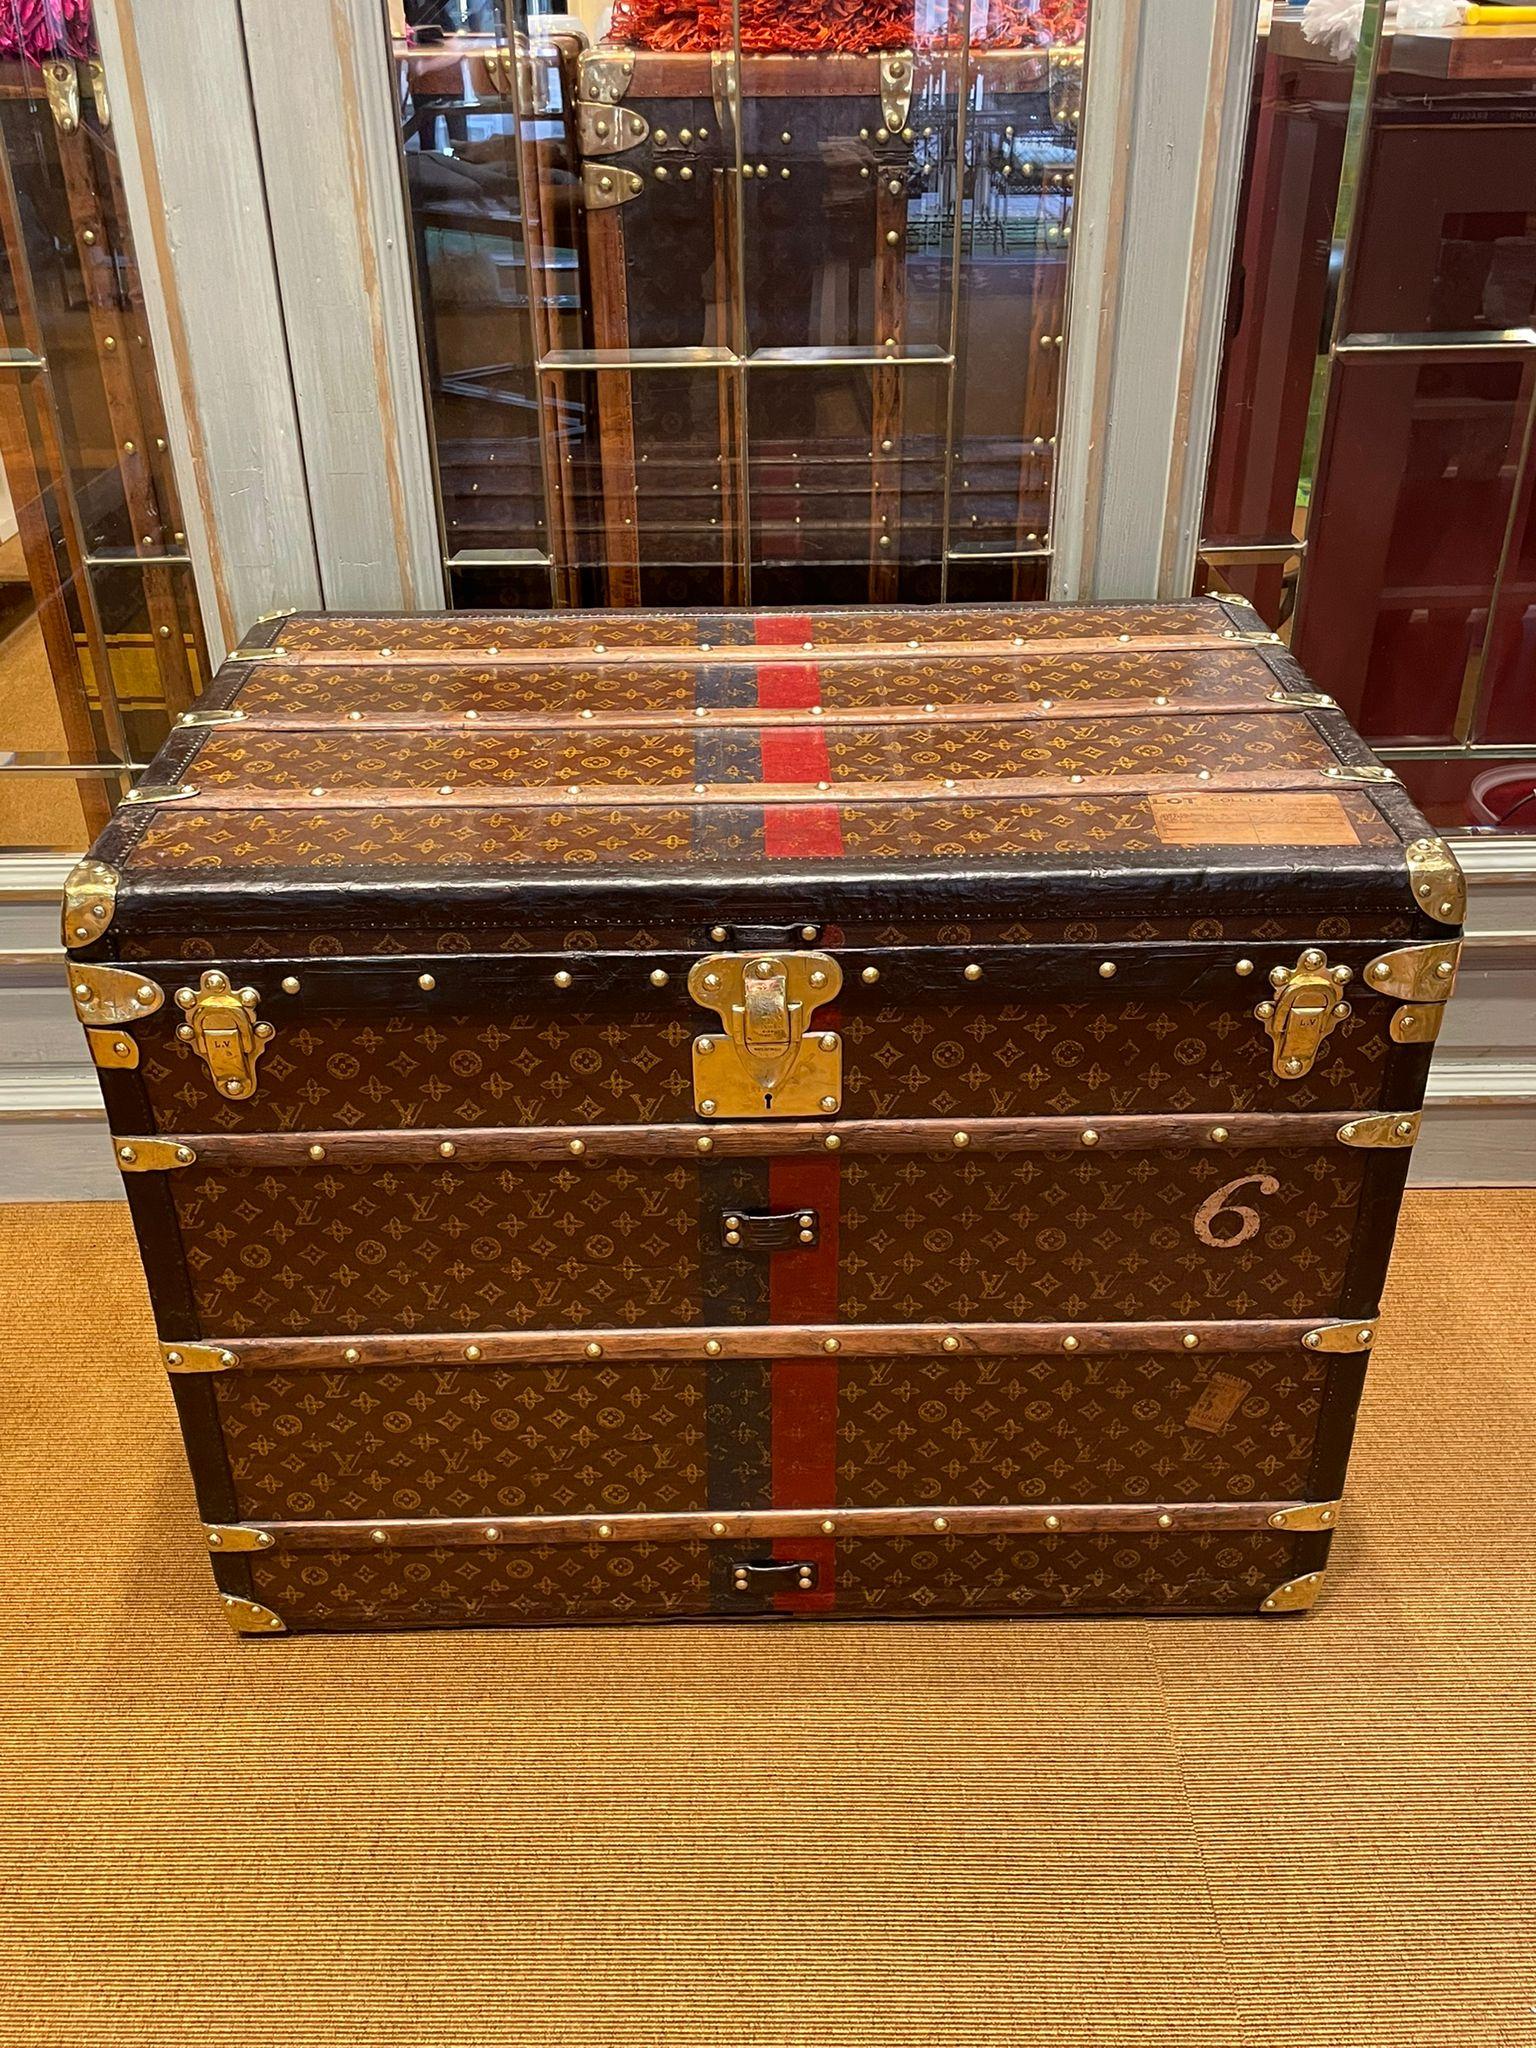 An exquisite “malle haute“ (tall trunk) by Louis Vuitton, early 20th century made in France, Paris.
The malle haute is the largest of the standard sizes, any trunk larger than this one would have been custom made.
Covered in the world famous LV